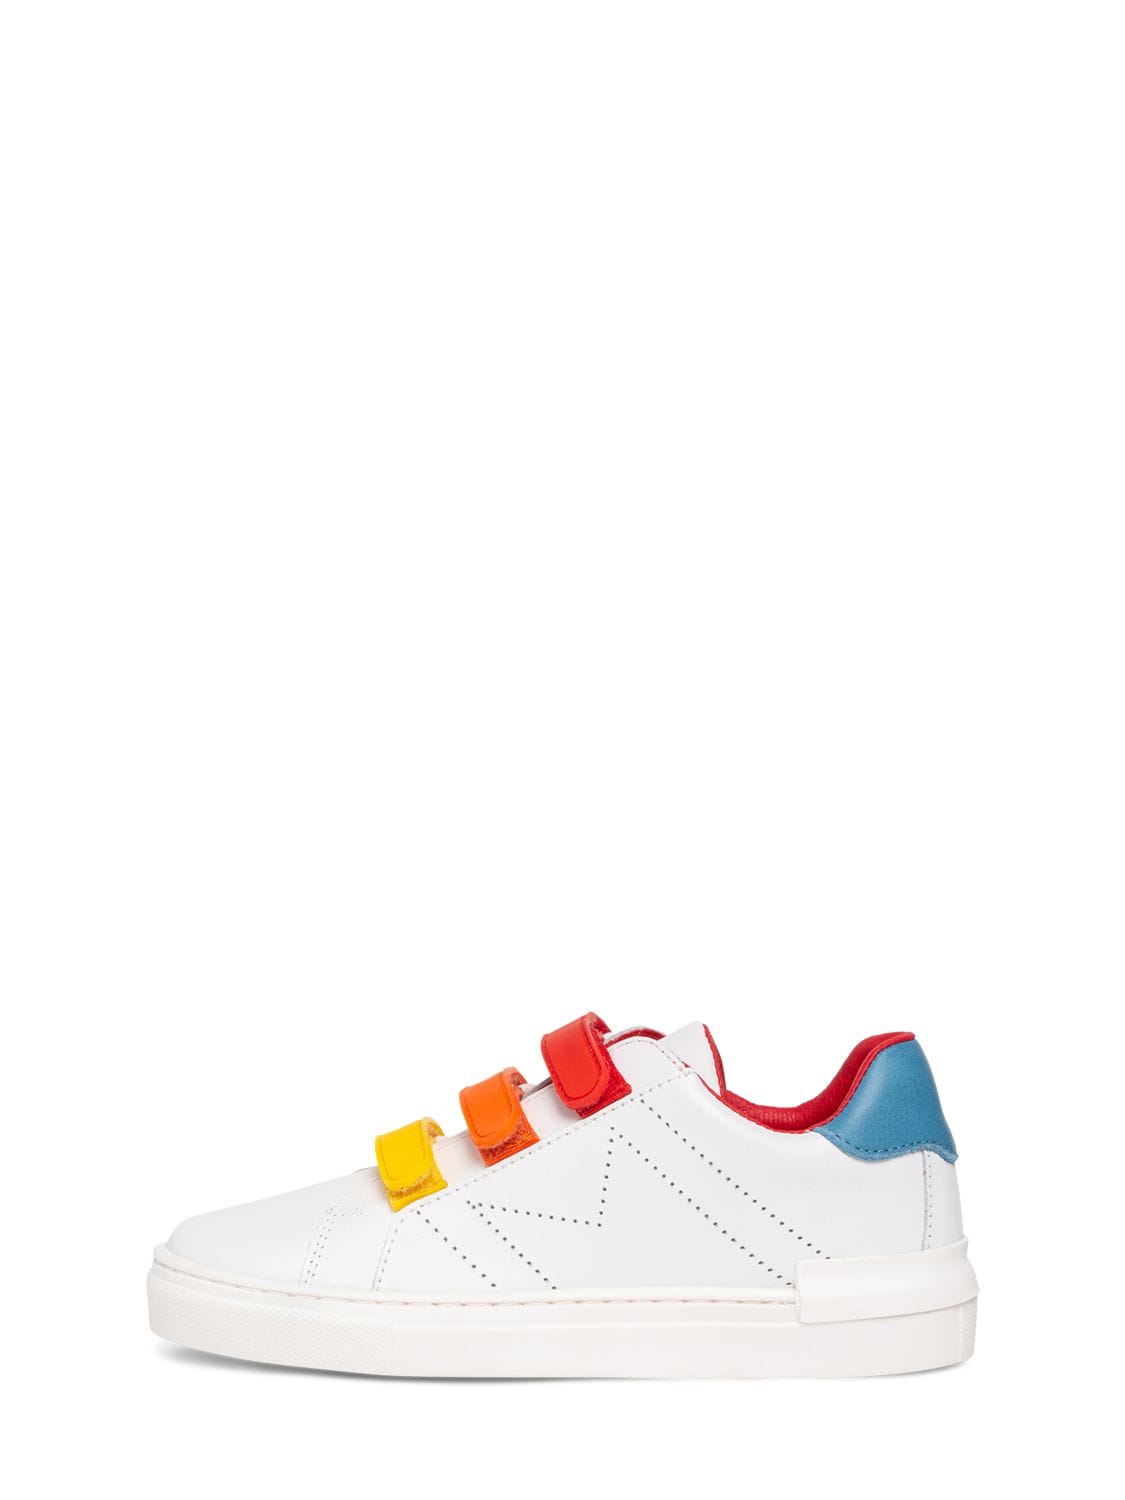 MARC JACOBS STRAPS LEATHER SNEAKERS